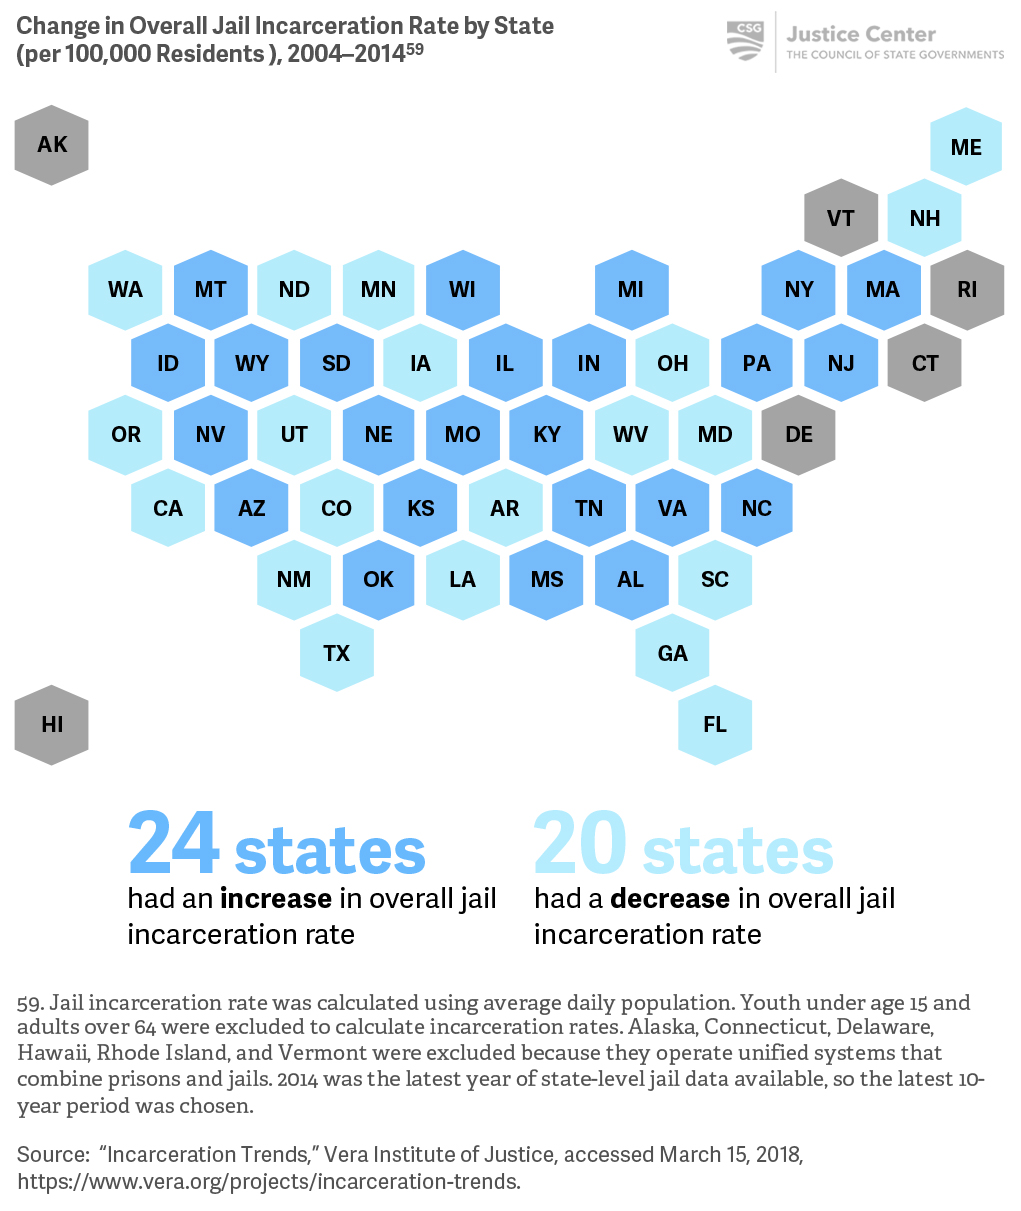 The overall jail incarceration rate has increased in 24 states and fallen in 20 states in recent years.